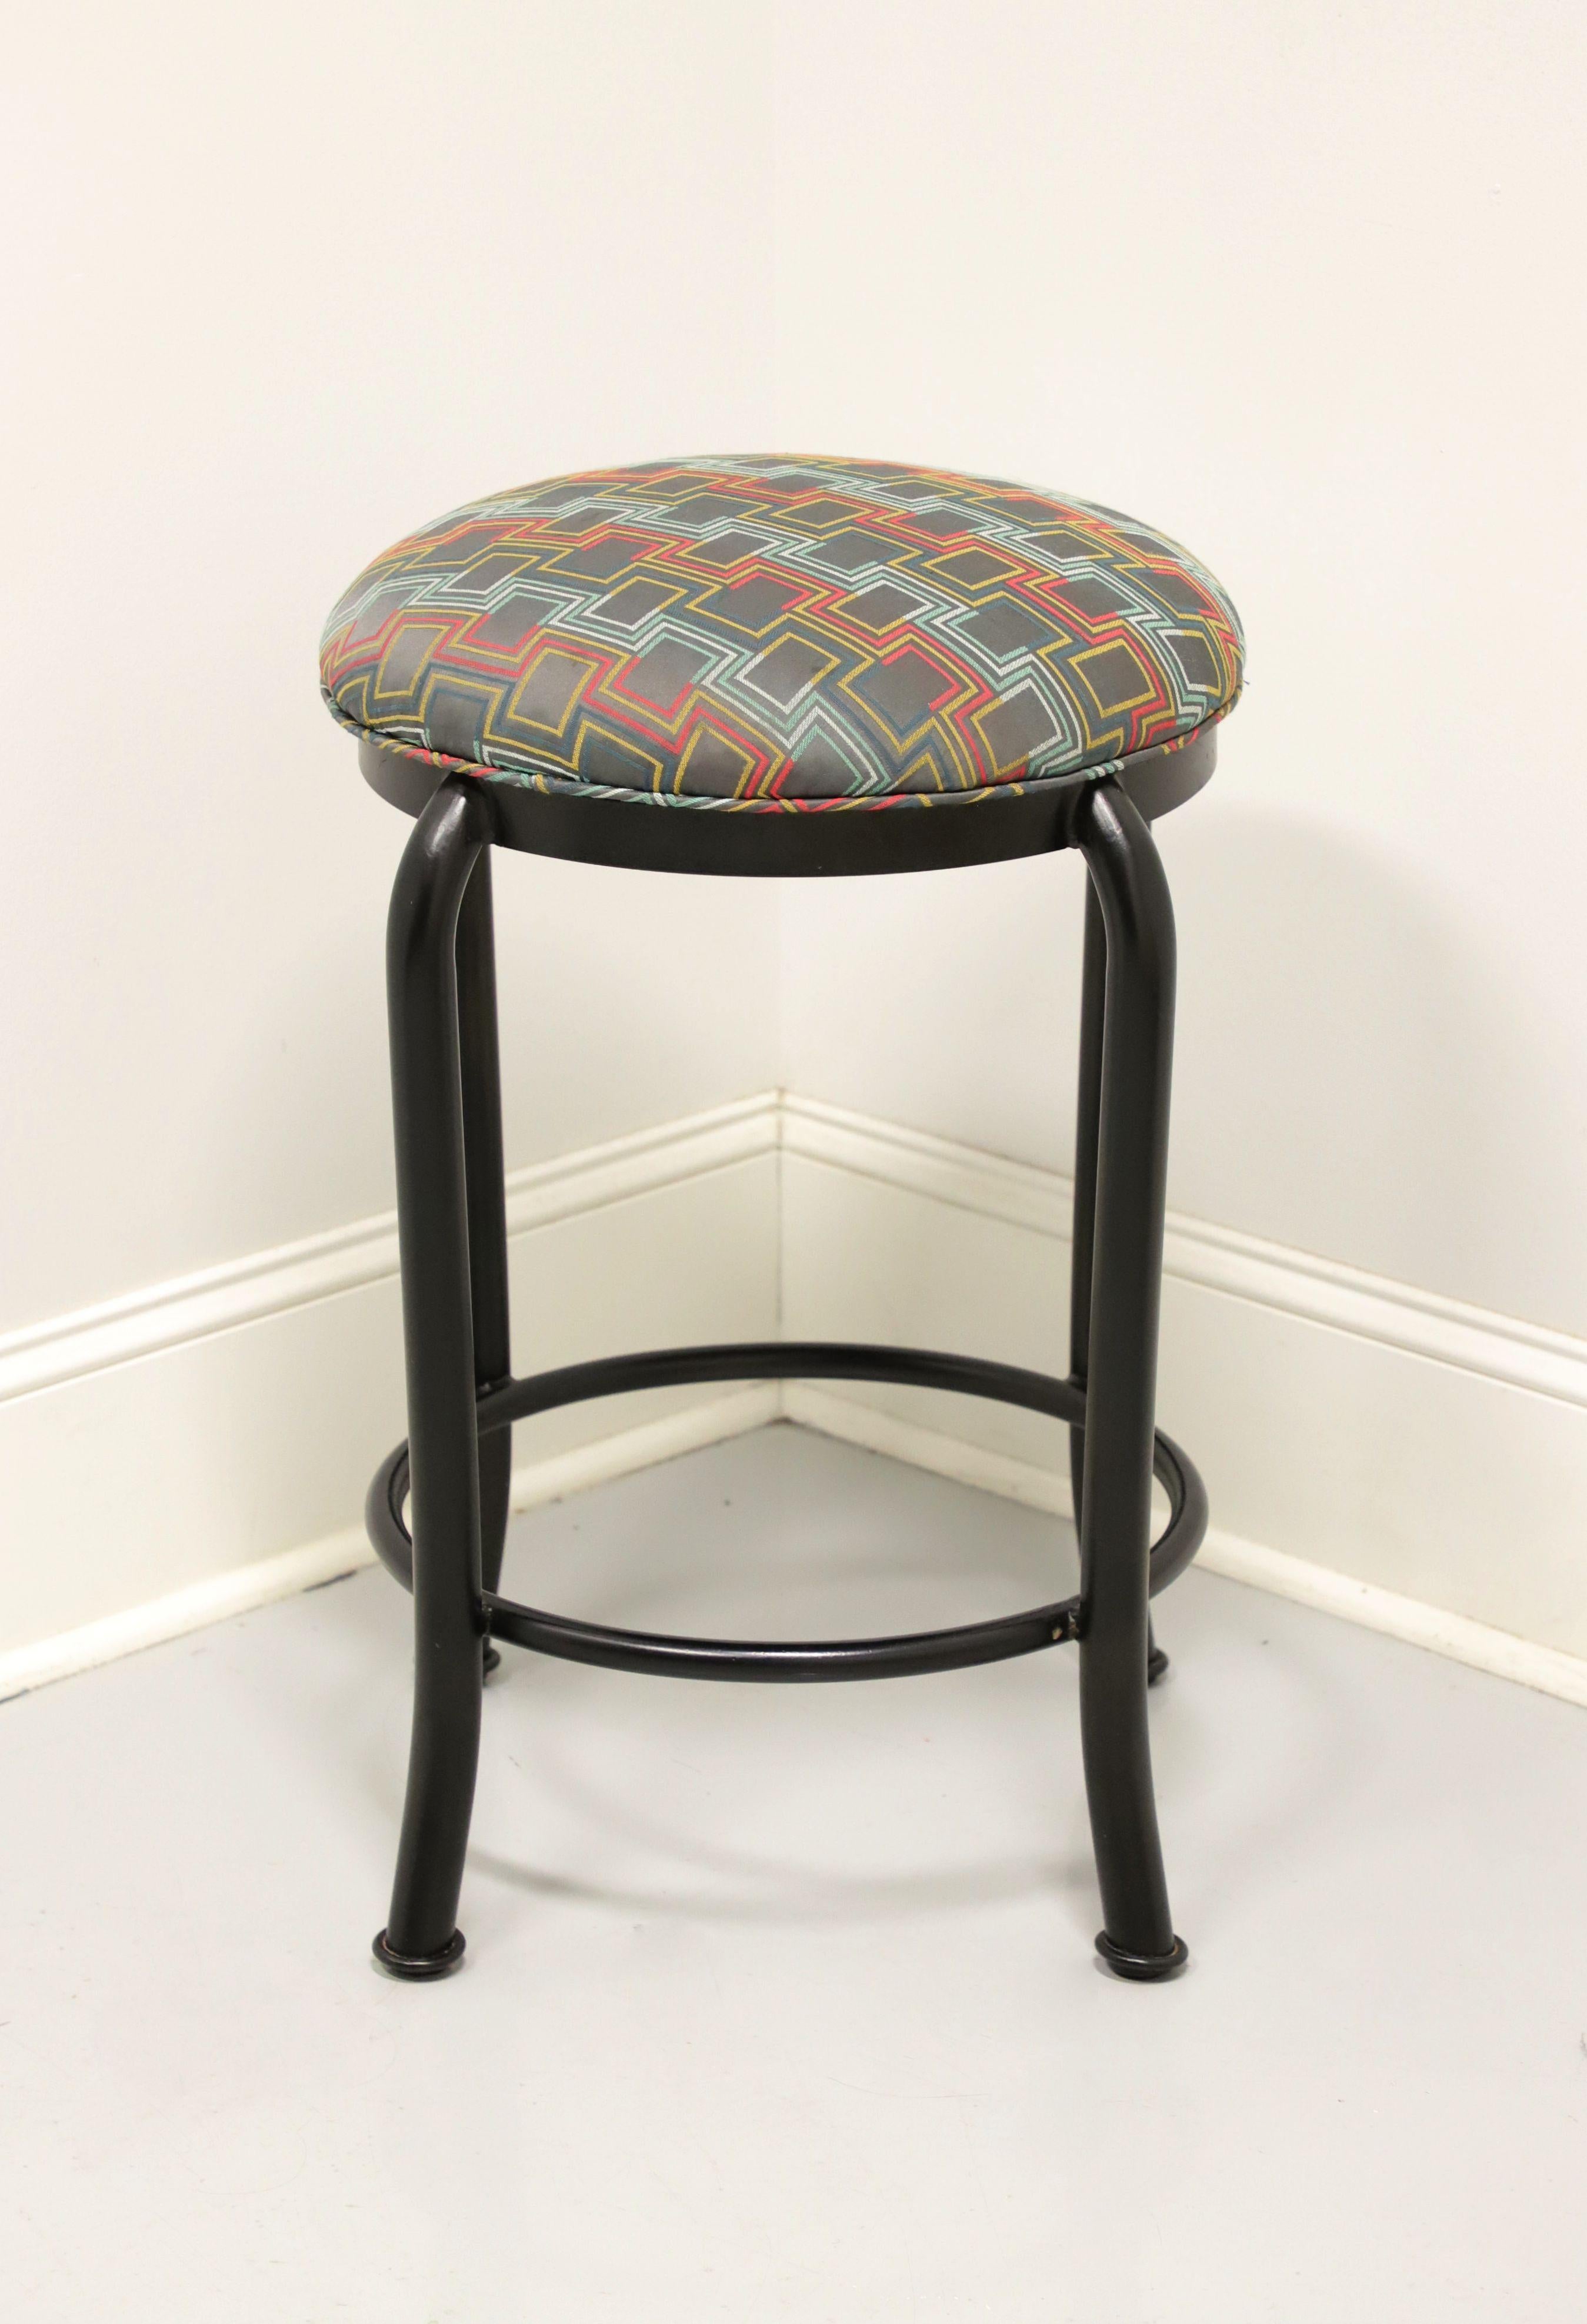 A Transitional style counter-height stool, unbranded. Black metal frame, 360 degree swivel mechanism, geometric pattern fabric upholstered seat and metal surround footrest. Likely made in the USA, in the late 20th Century. 

Measures: Overall: 17w